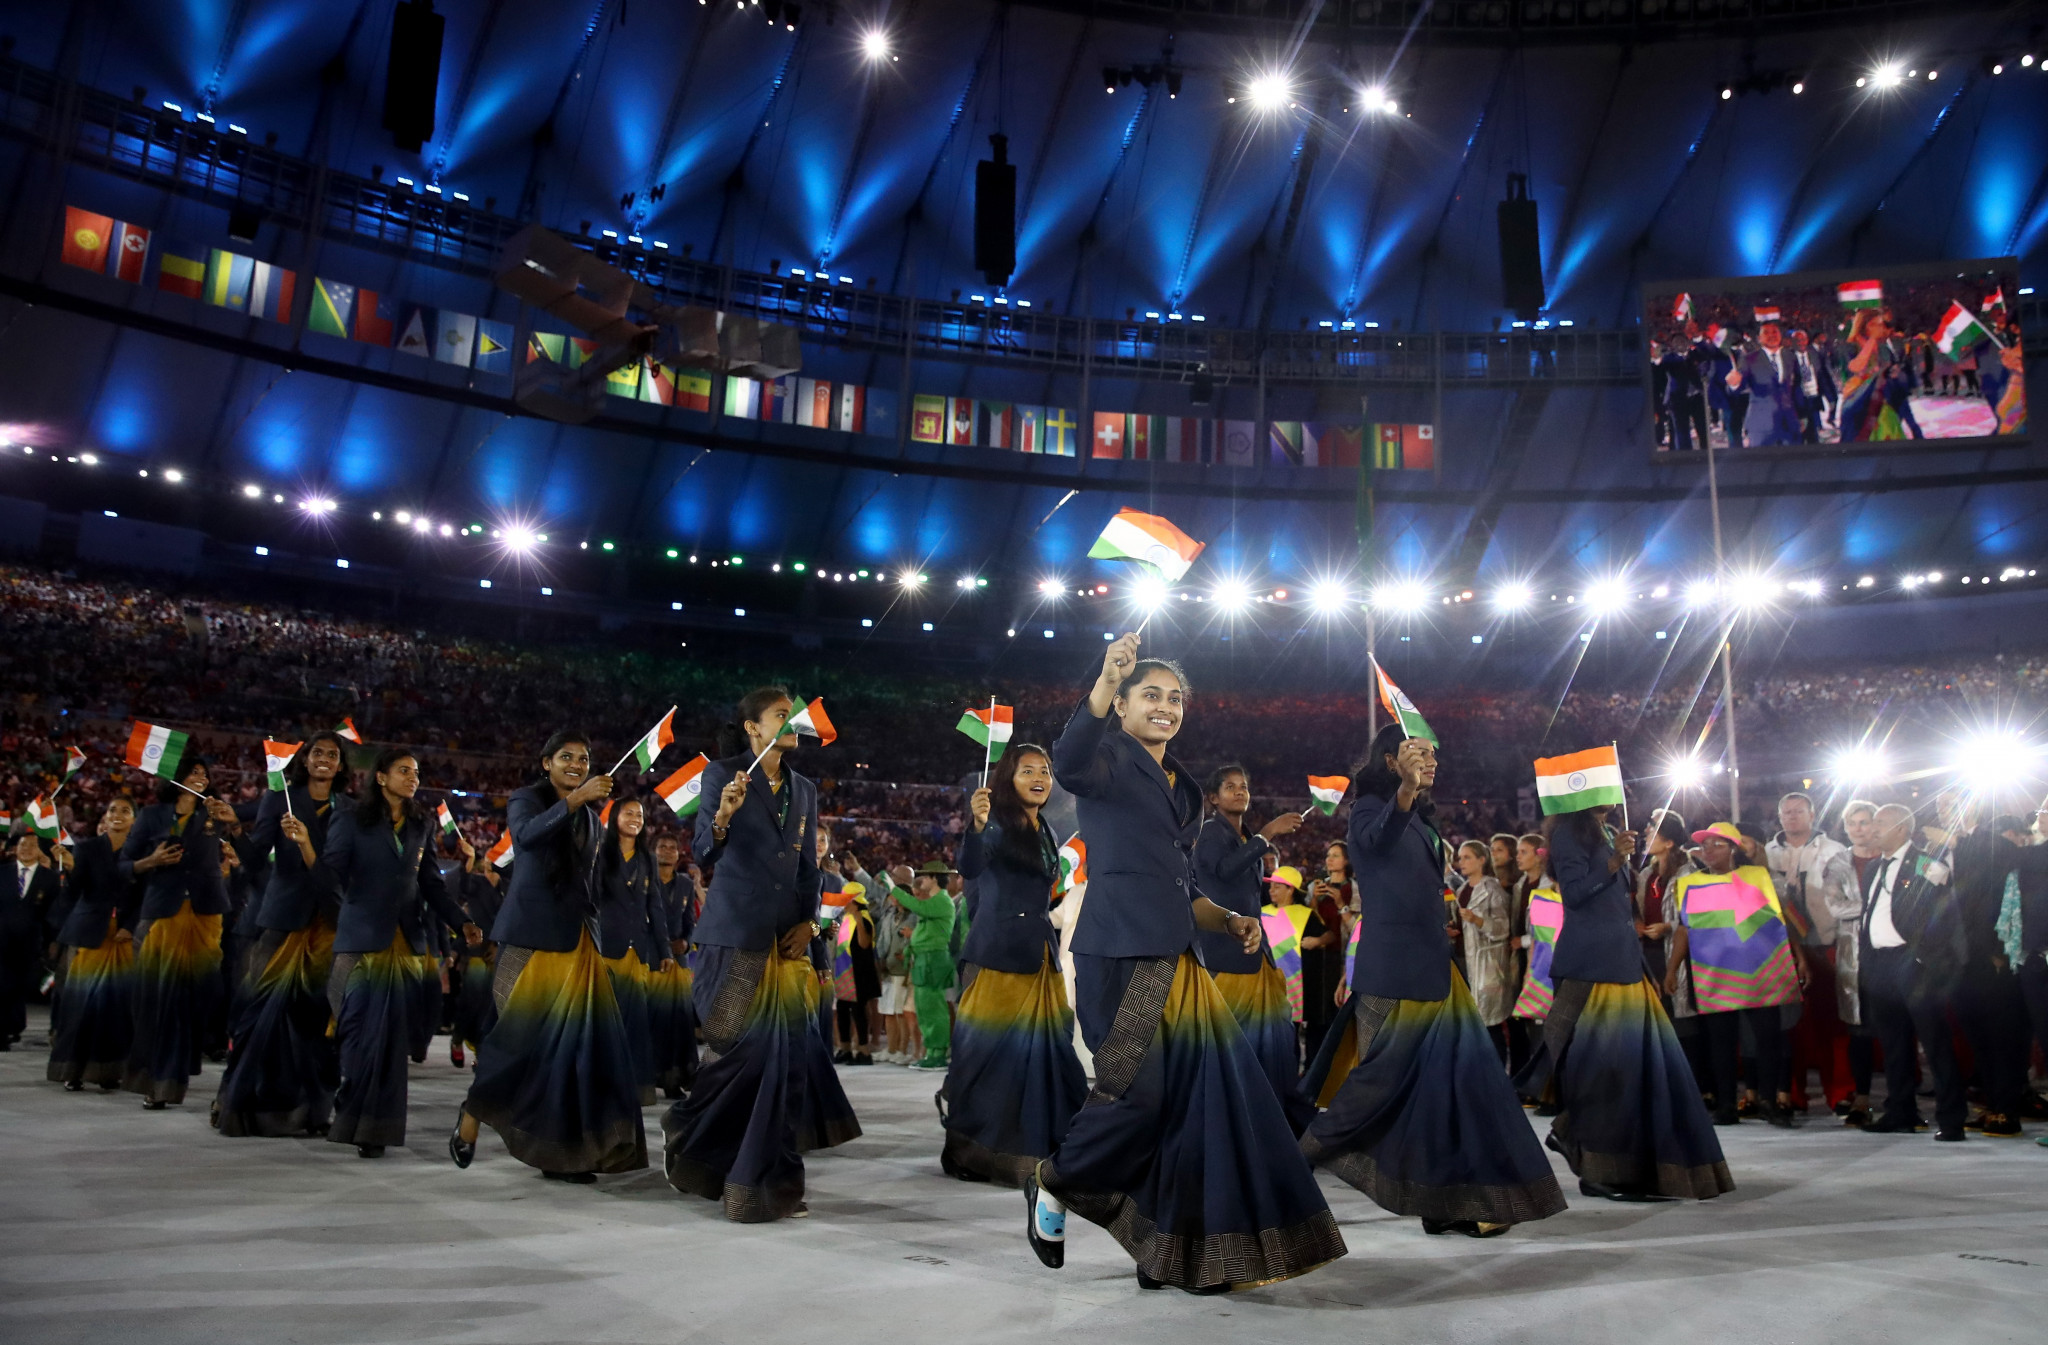 Indian female athletes divided over absence of traditional sari at Gold Coast 2018 Opening Ceremony